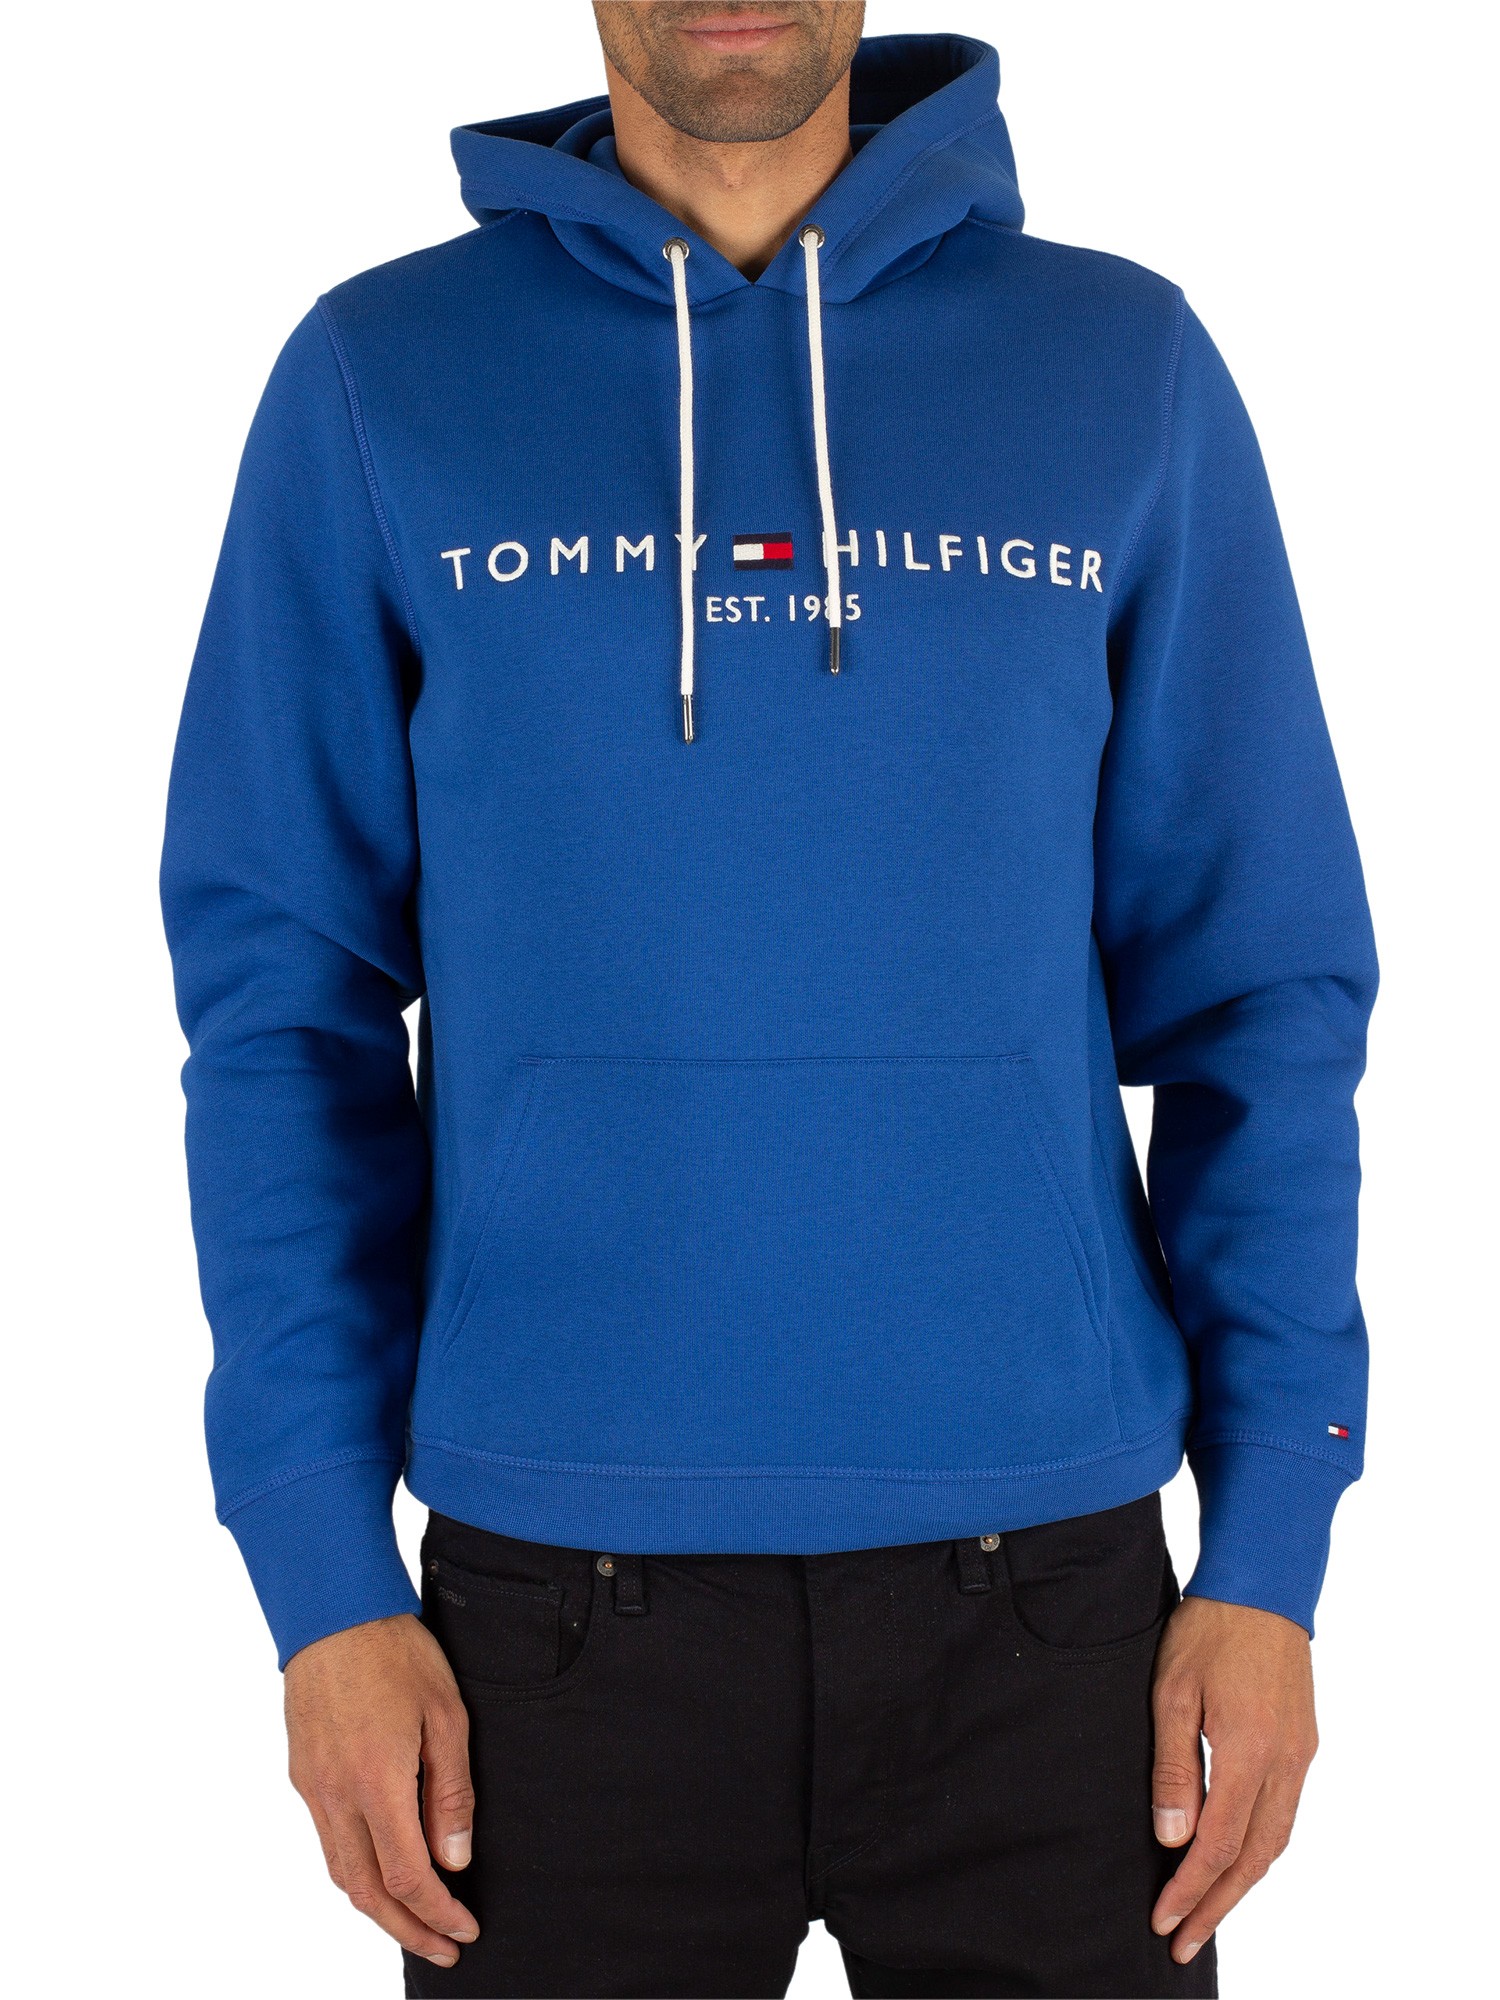 tommy jeans blue hoodie Online Shopping mall | Find the best prices and ...